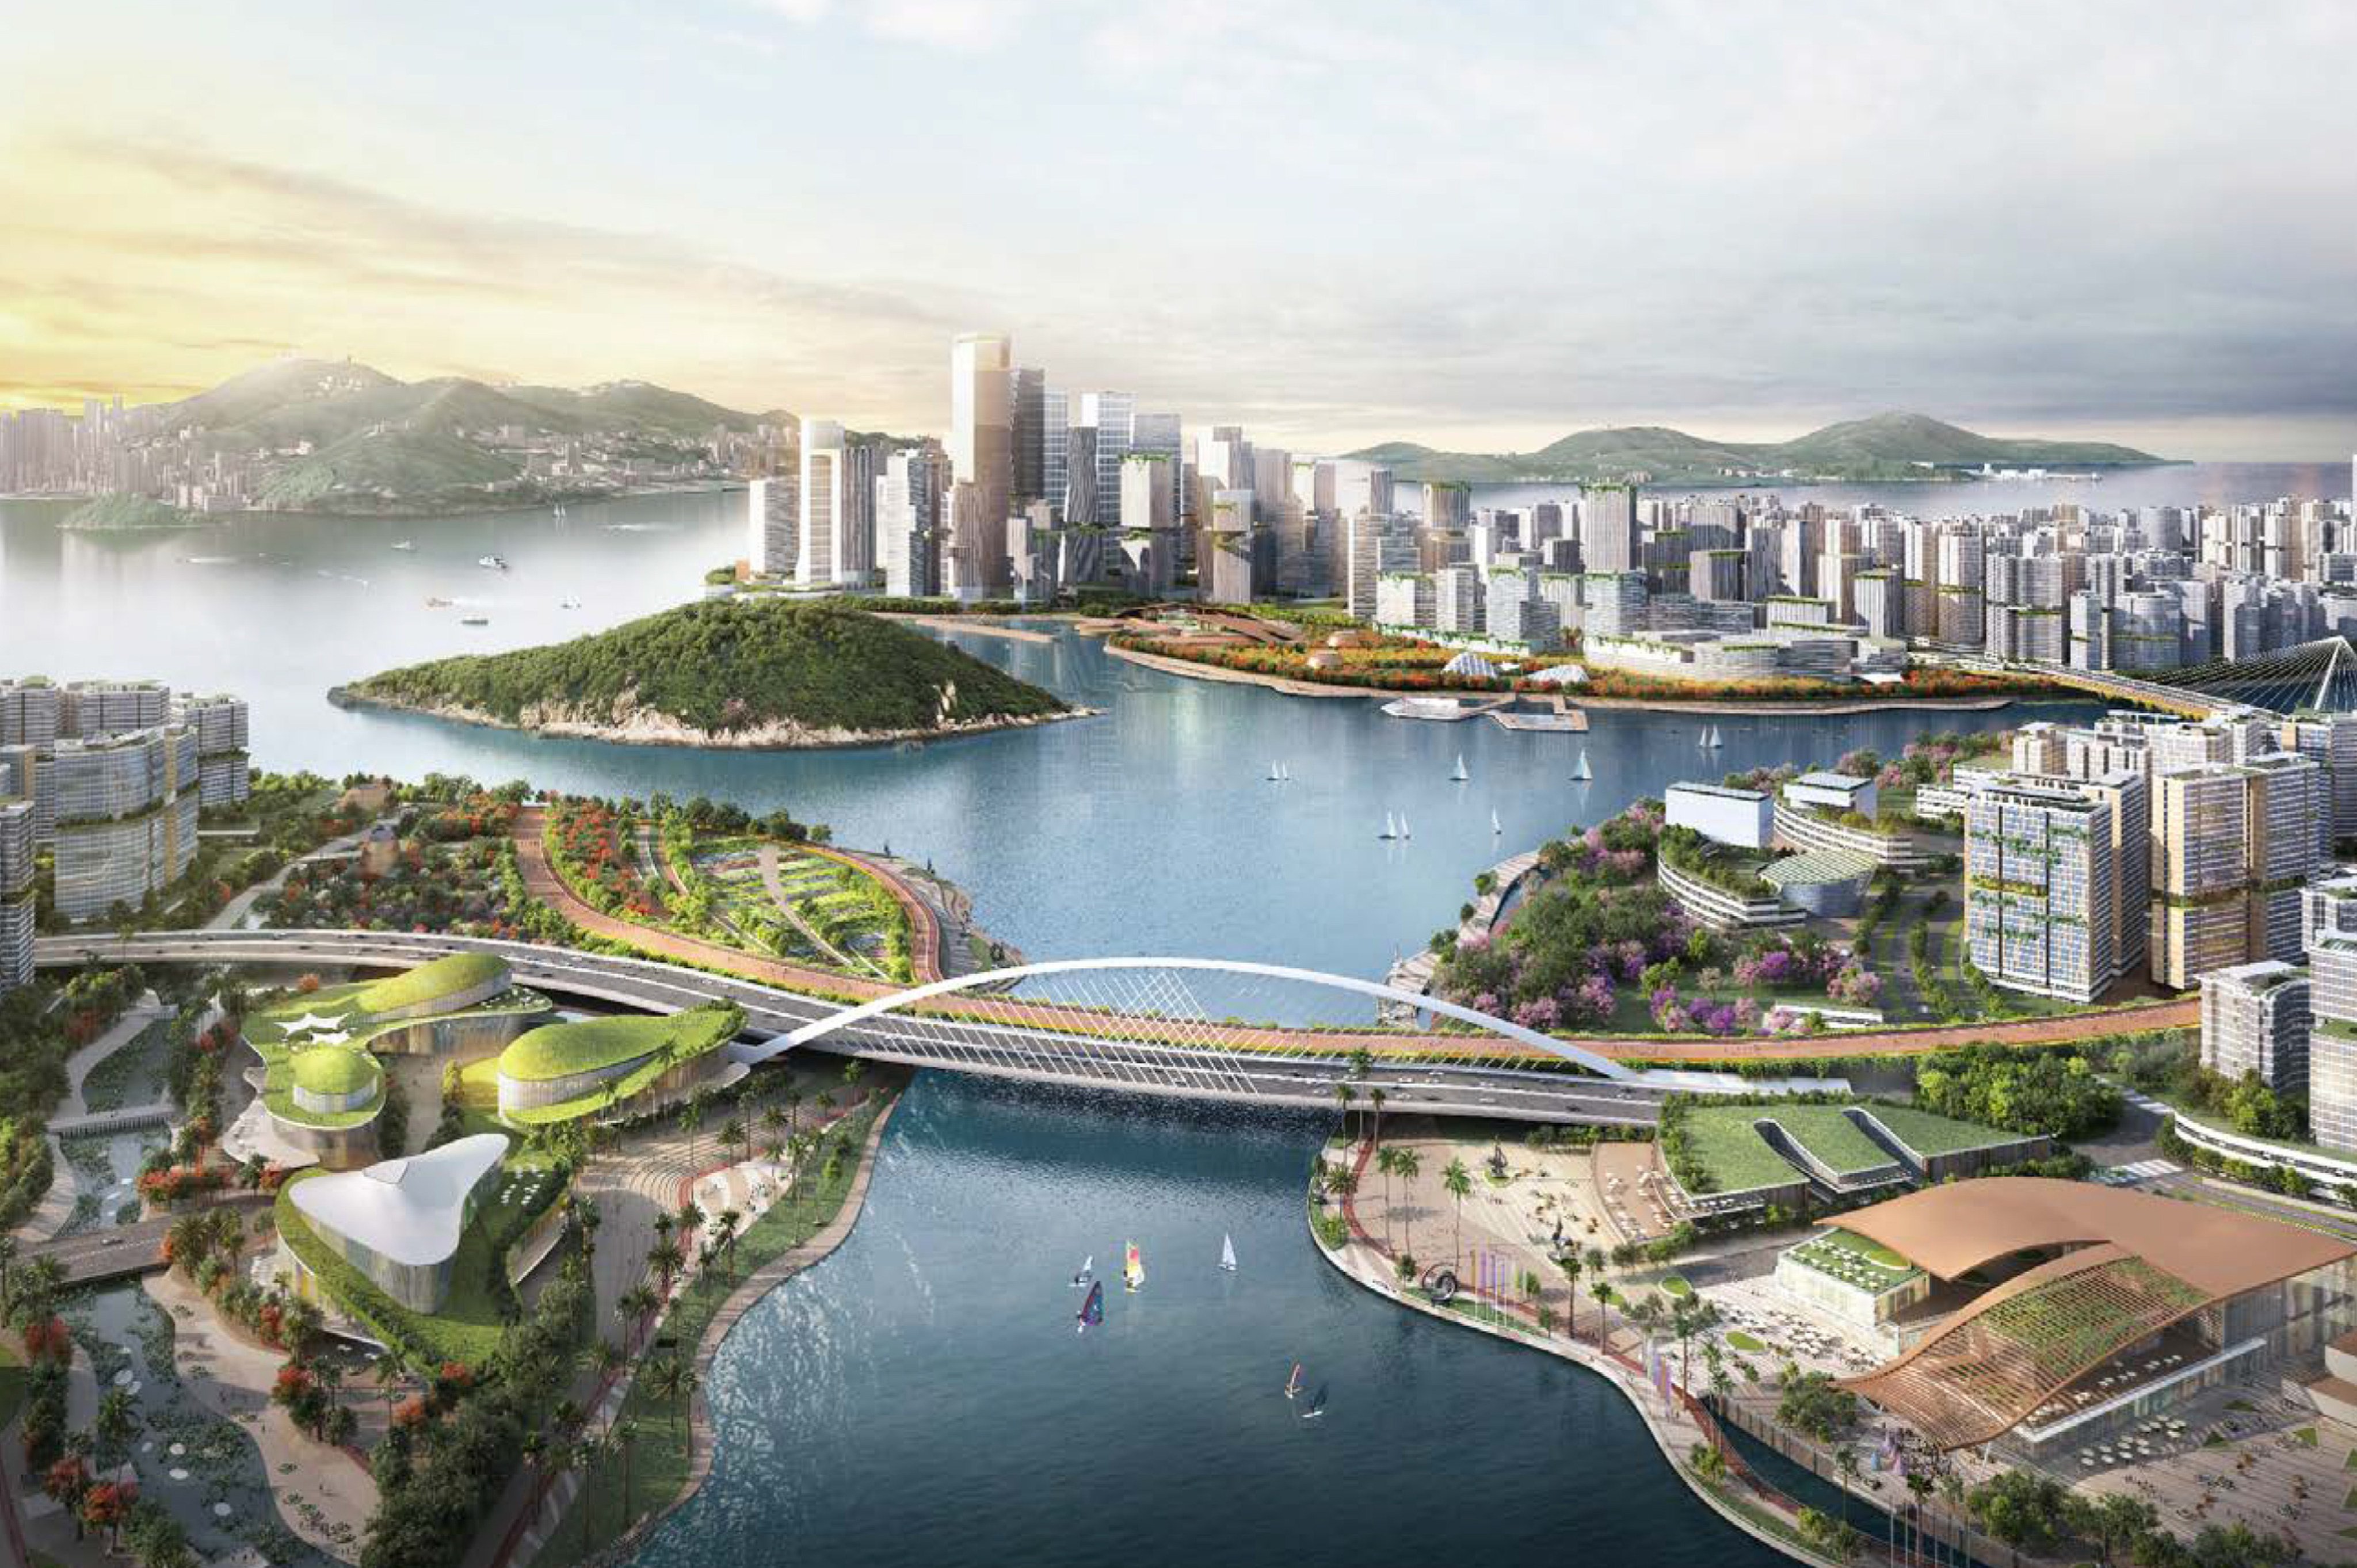 An illustration of the Lantau Tomorrow Vision project. The city’s finance chief has said work may be delayed two to three years, at a time when authorities are grappling with a large deficit. Photo: Handout